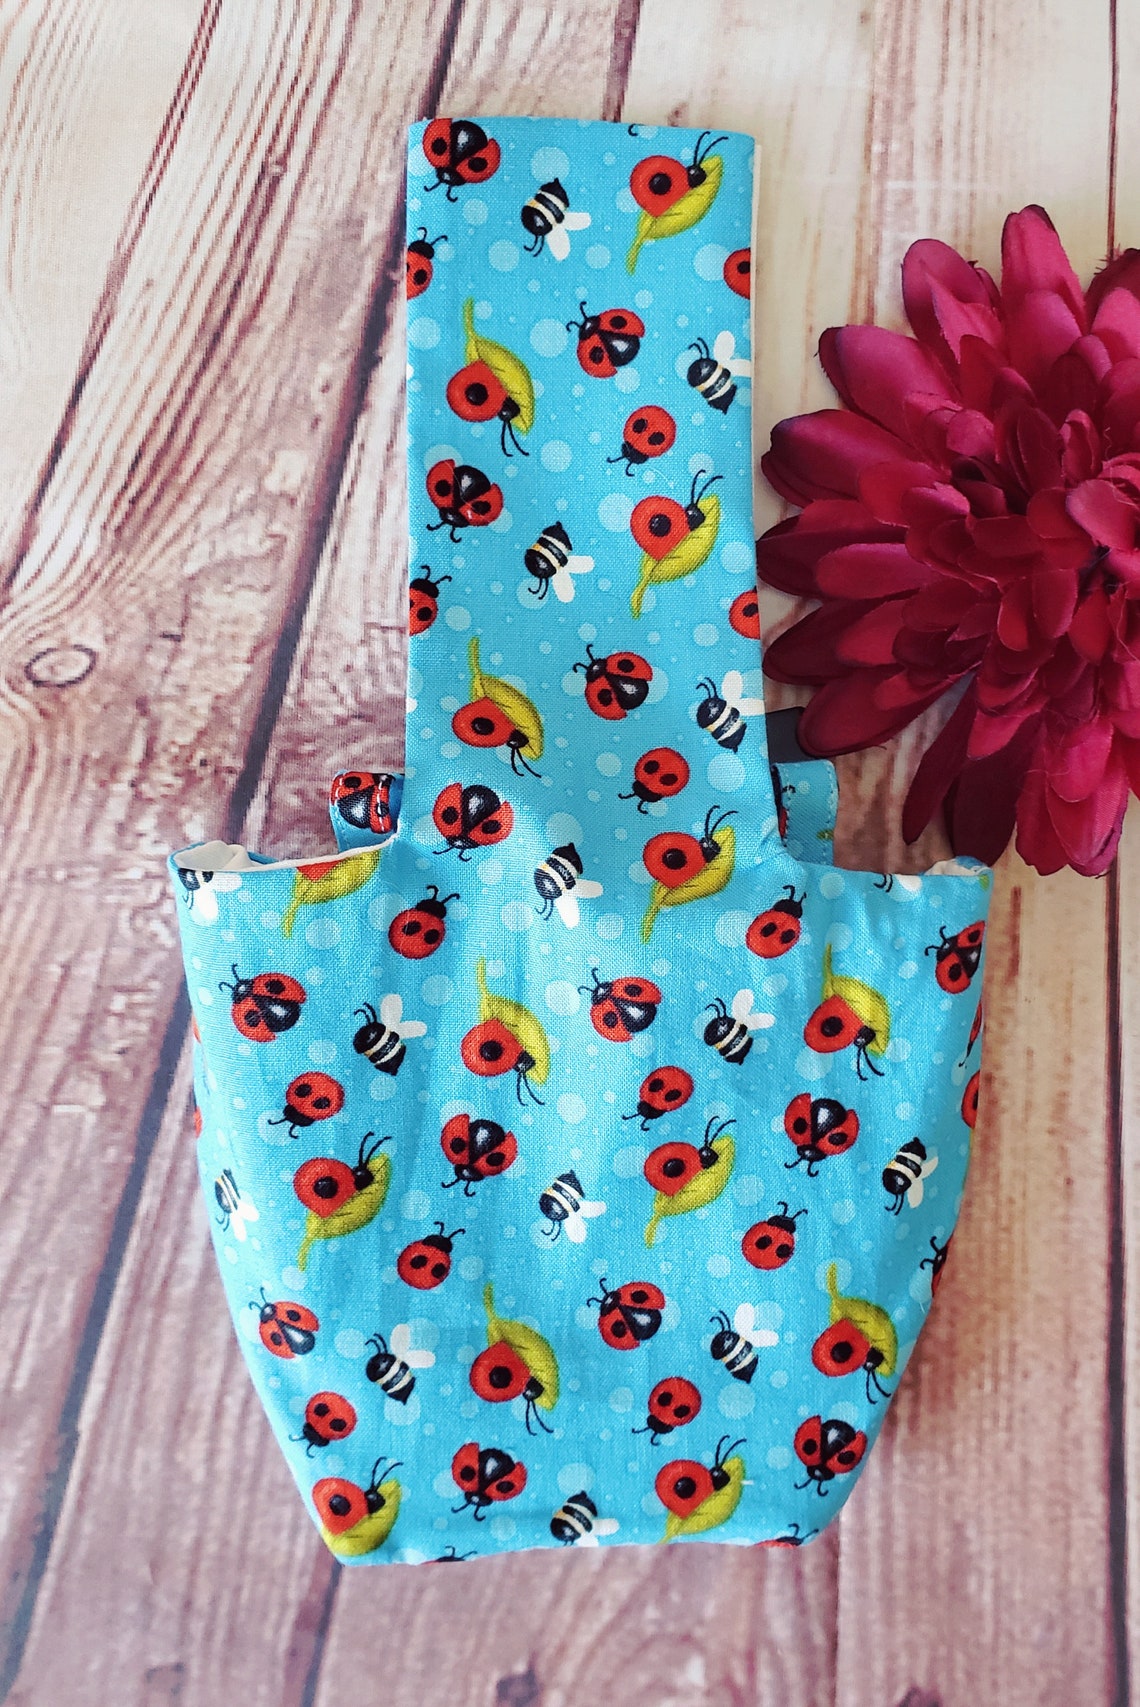 chicken-diaper-standard-size-for-house-chicken-care-adjustable-etsy